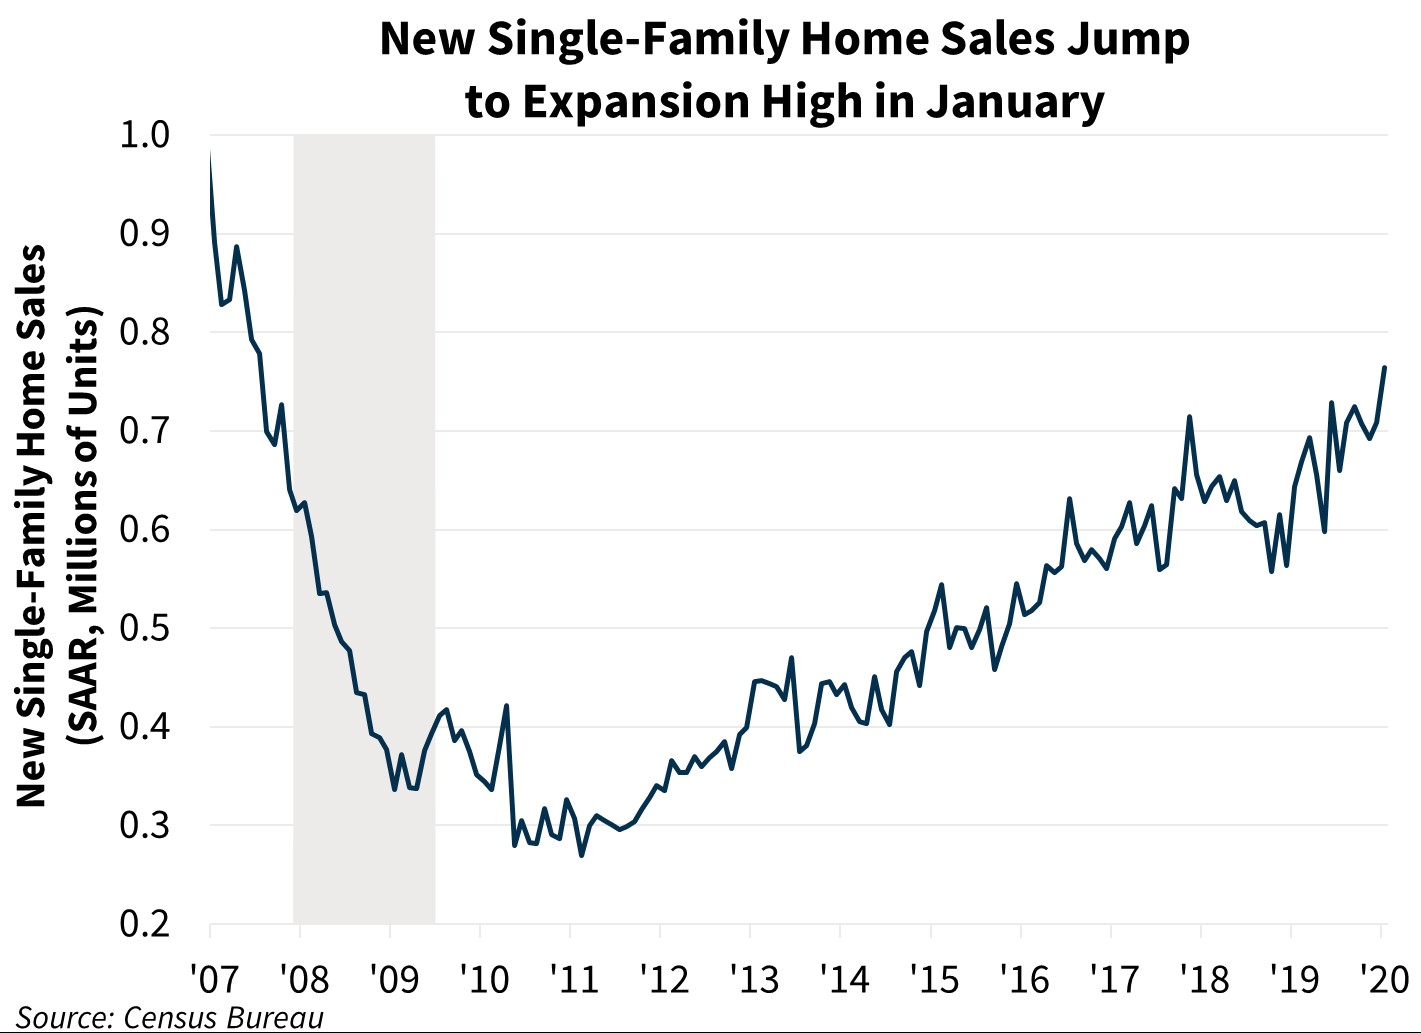 New Single-Family Home Sales Jump to Expansion High in January